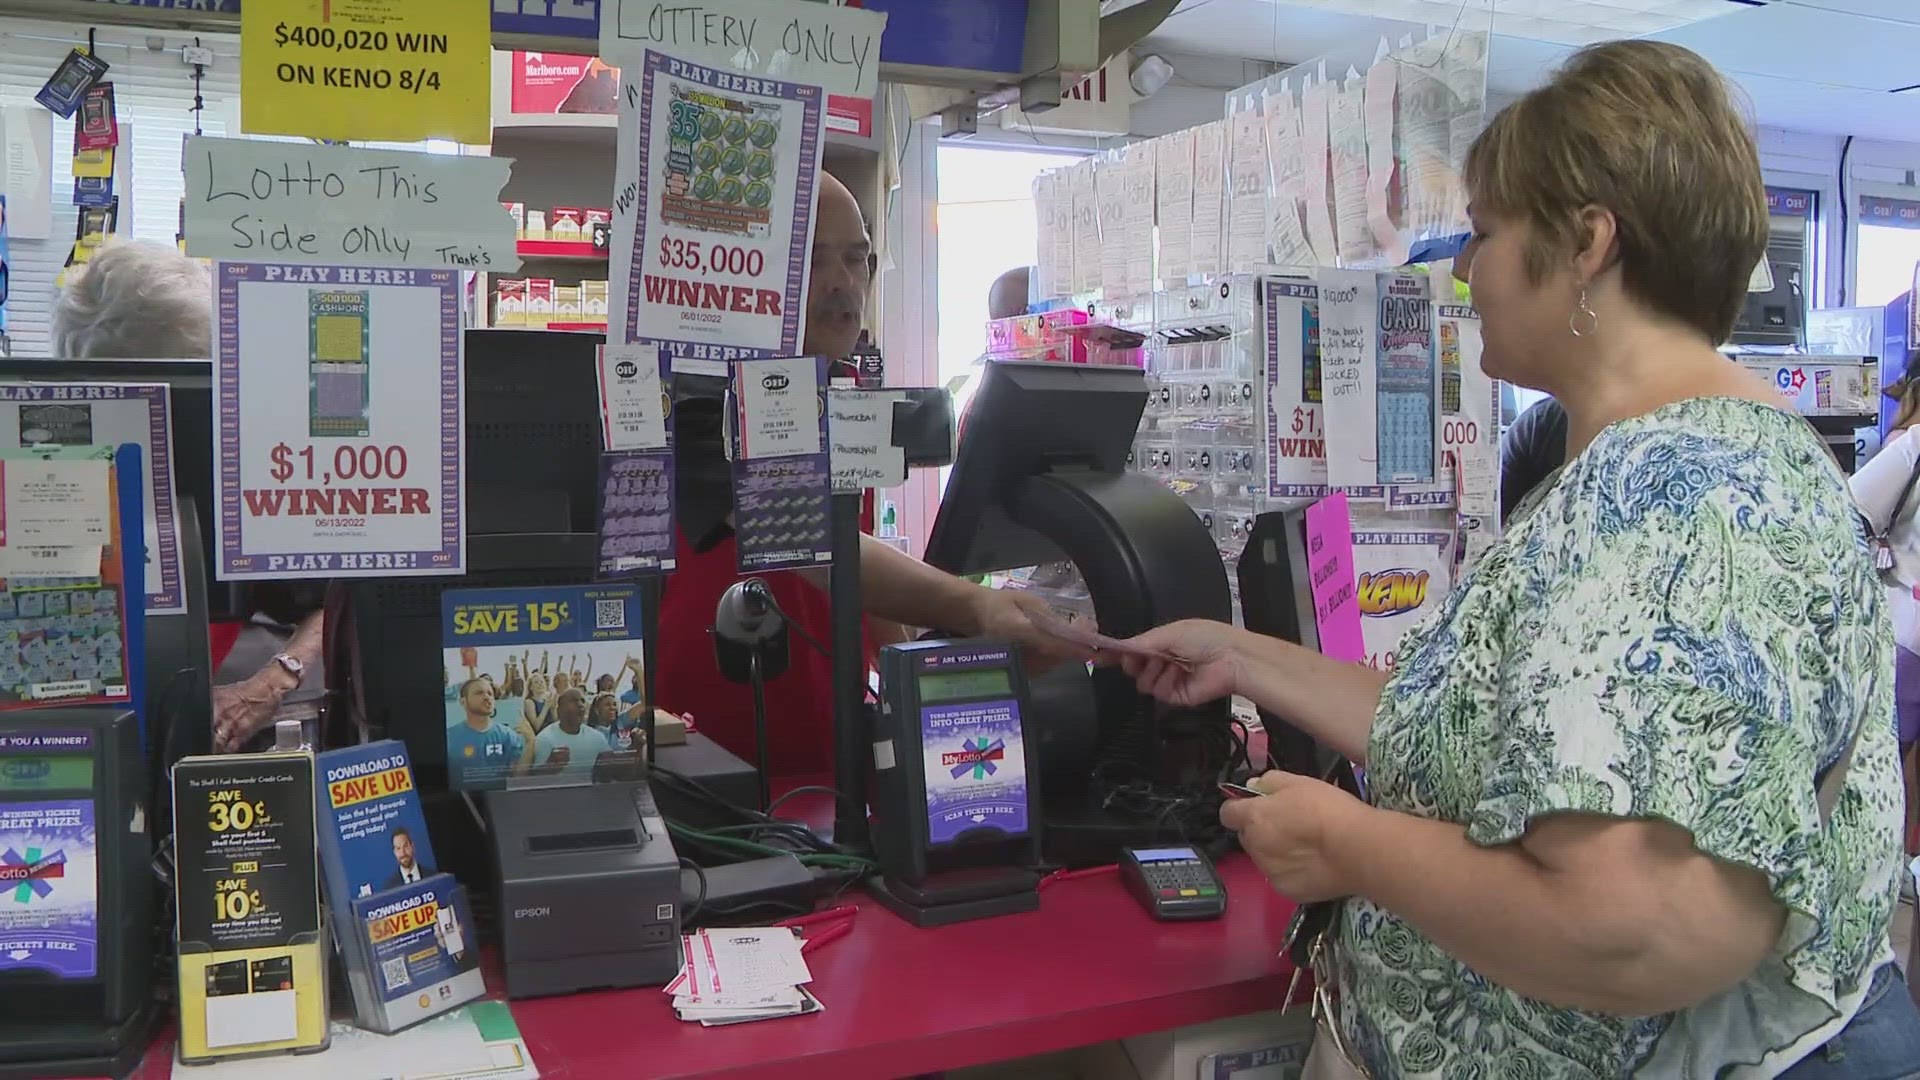 The cybersecurity issue left Ohio Lottery winners mostly unable to cash rewards of $600 or more, while fully suspending mobile cashing of all prize values.